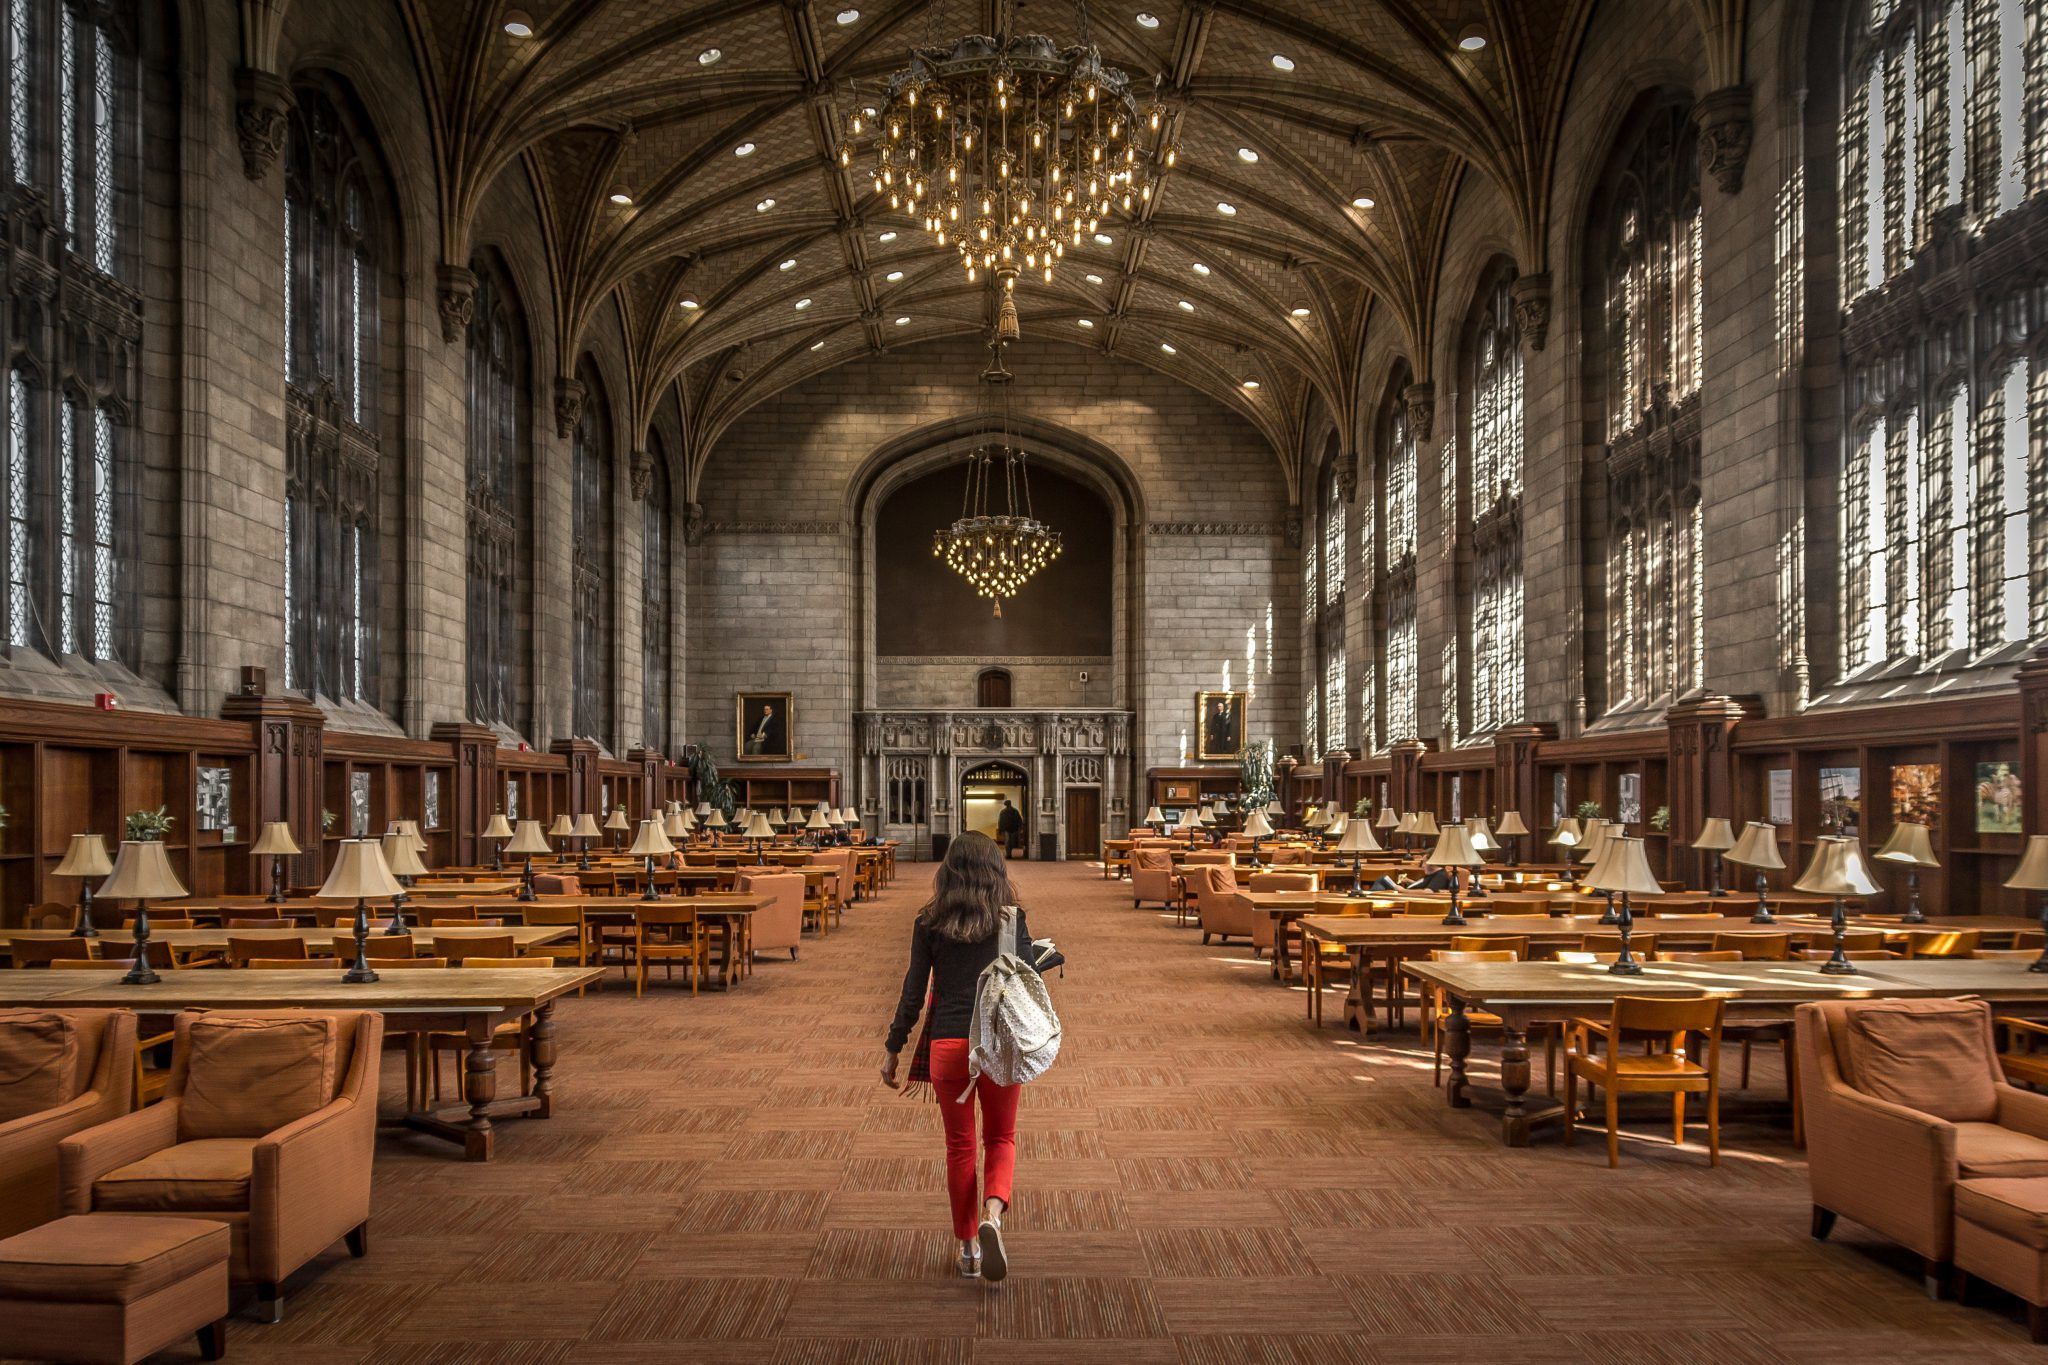 The Consequences of University of Chicago’s Choices